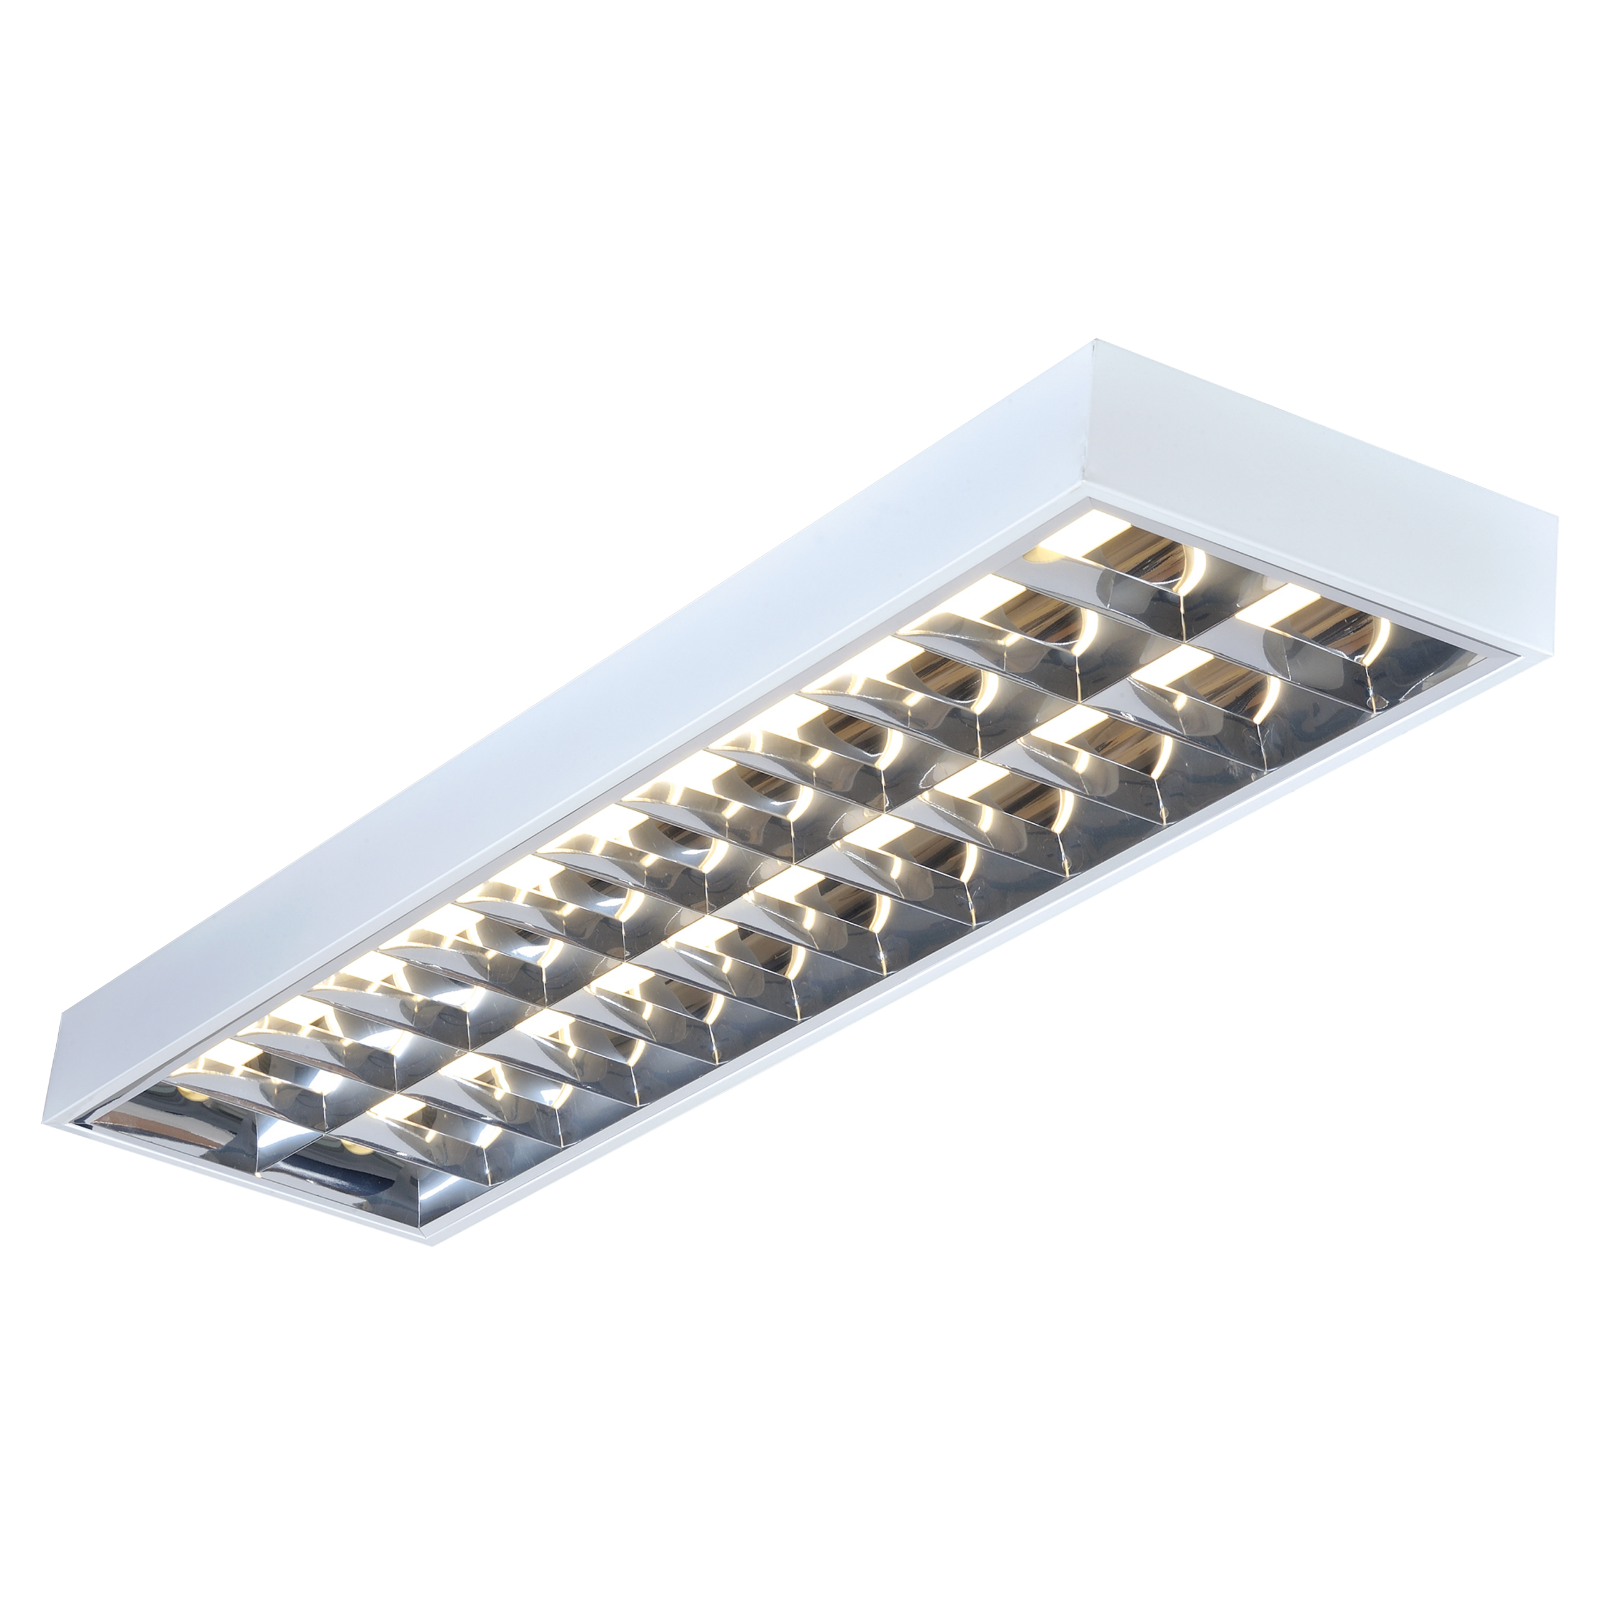 IP20 2x58W 5ft T8 Surface Mounted Emergency Fluorescent Fitting 1520x304x80mm - SURF258EMHF 